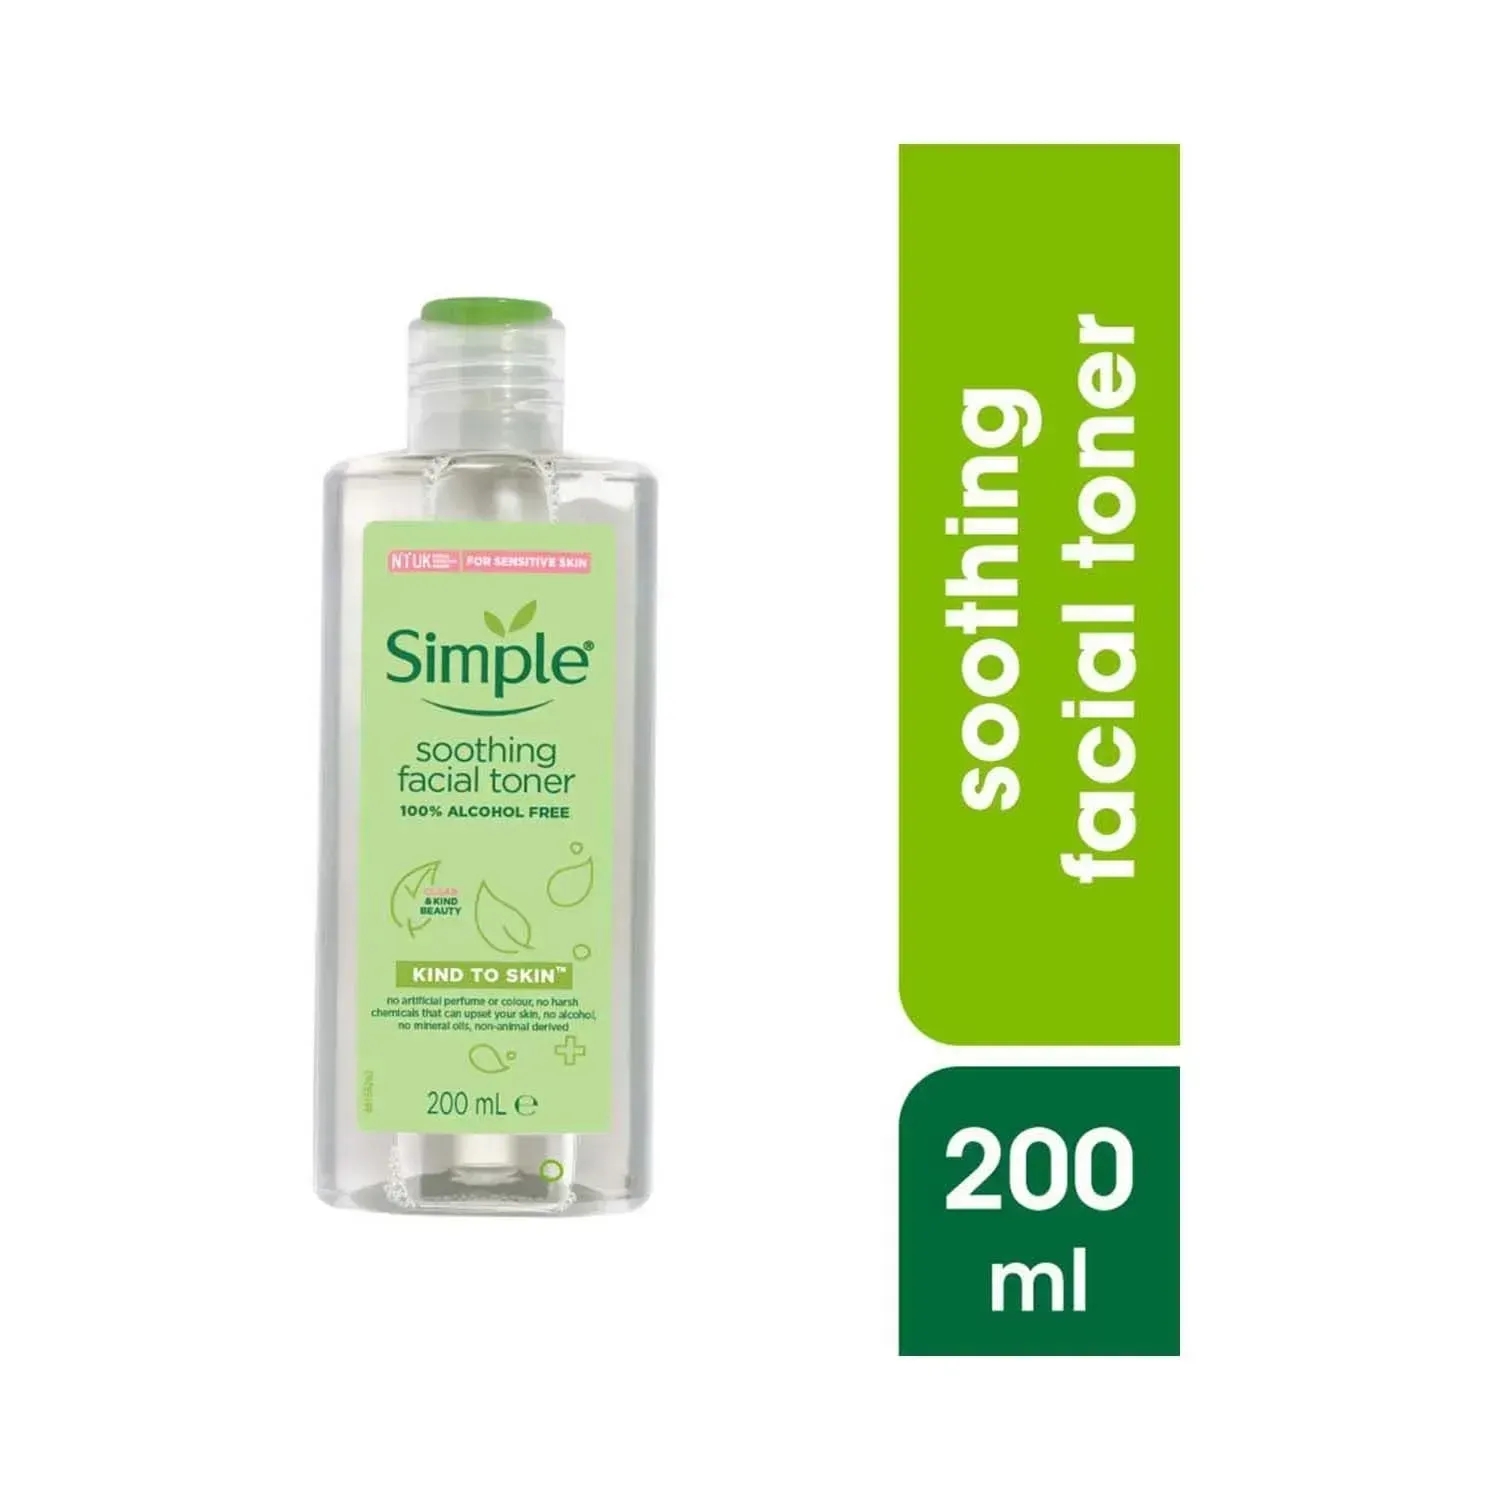 Kind to Skin Soothing Facial Toner